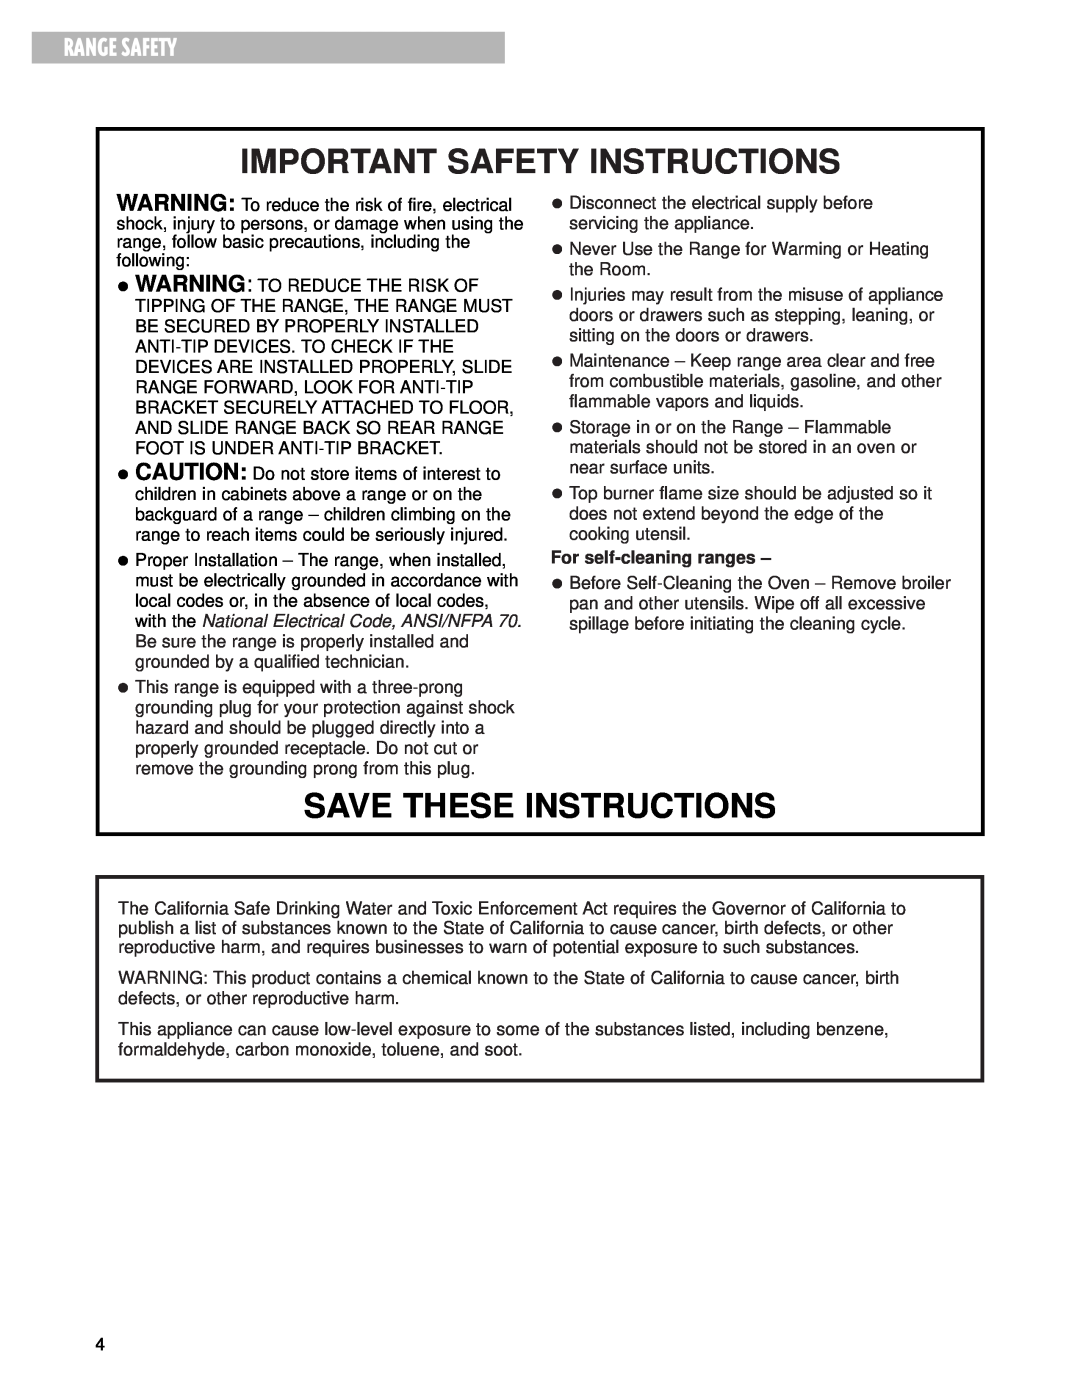 Whirlpool SF387LEG warranty Range Safety, Important Safety Instructions, Save These Instructions, For self-cleaning ranges 